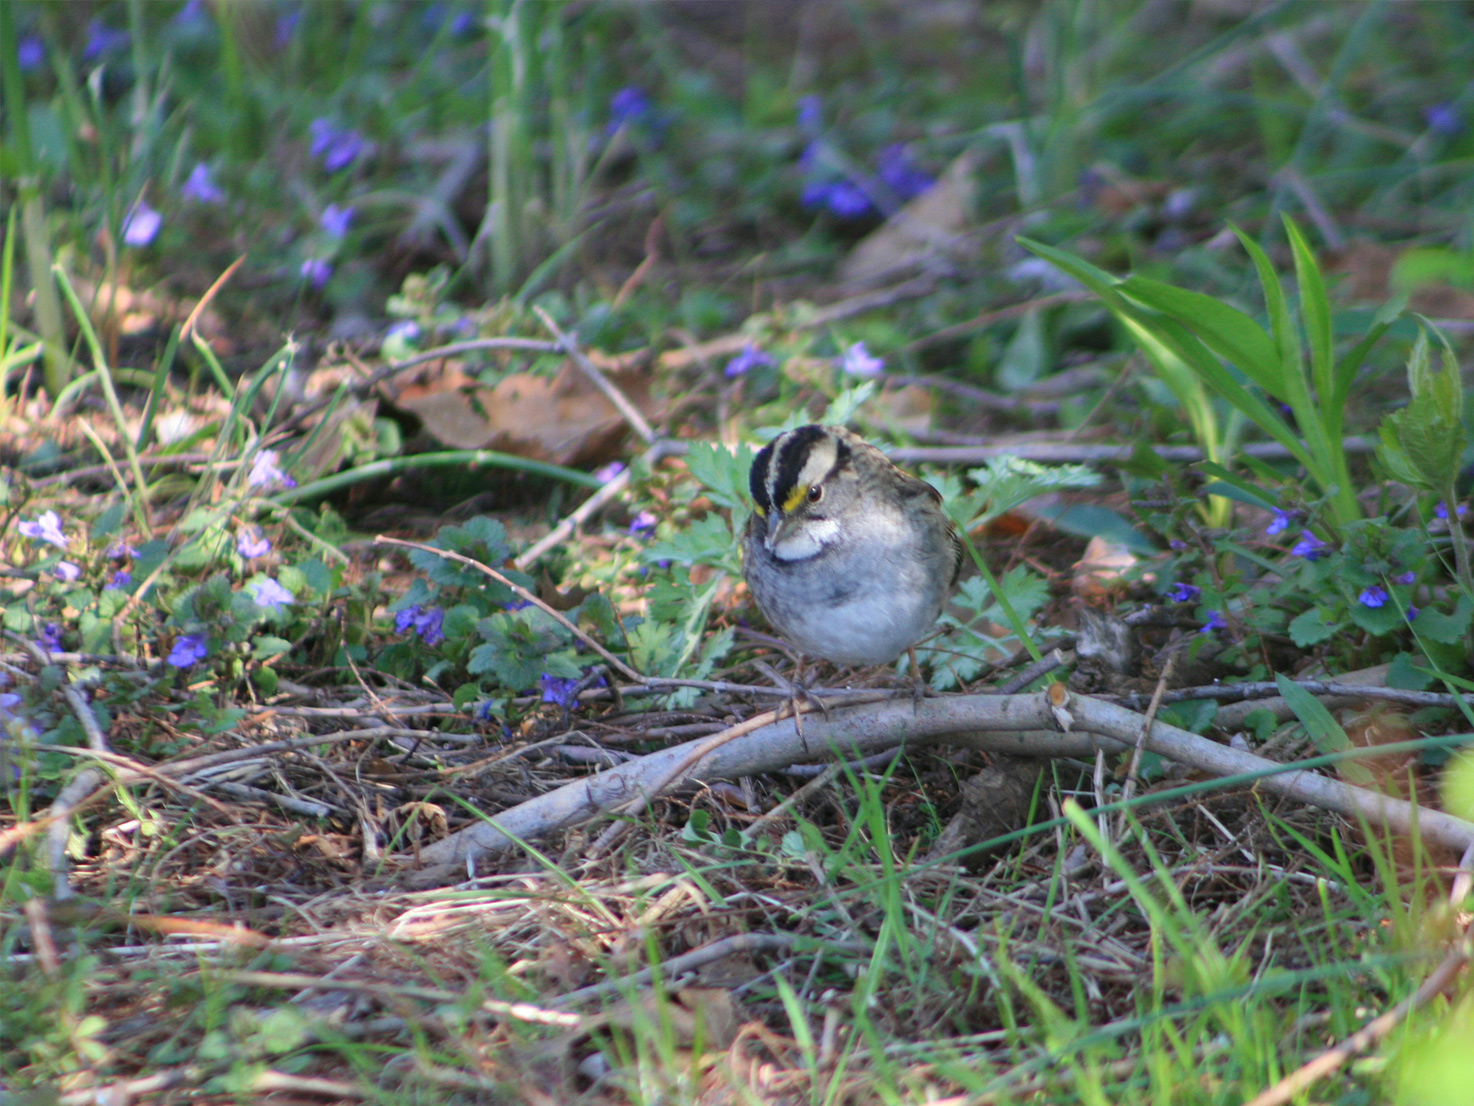 A small white throated sparrow on the ground among purple flowers